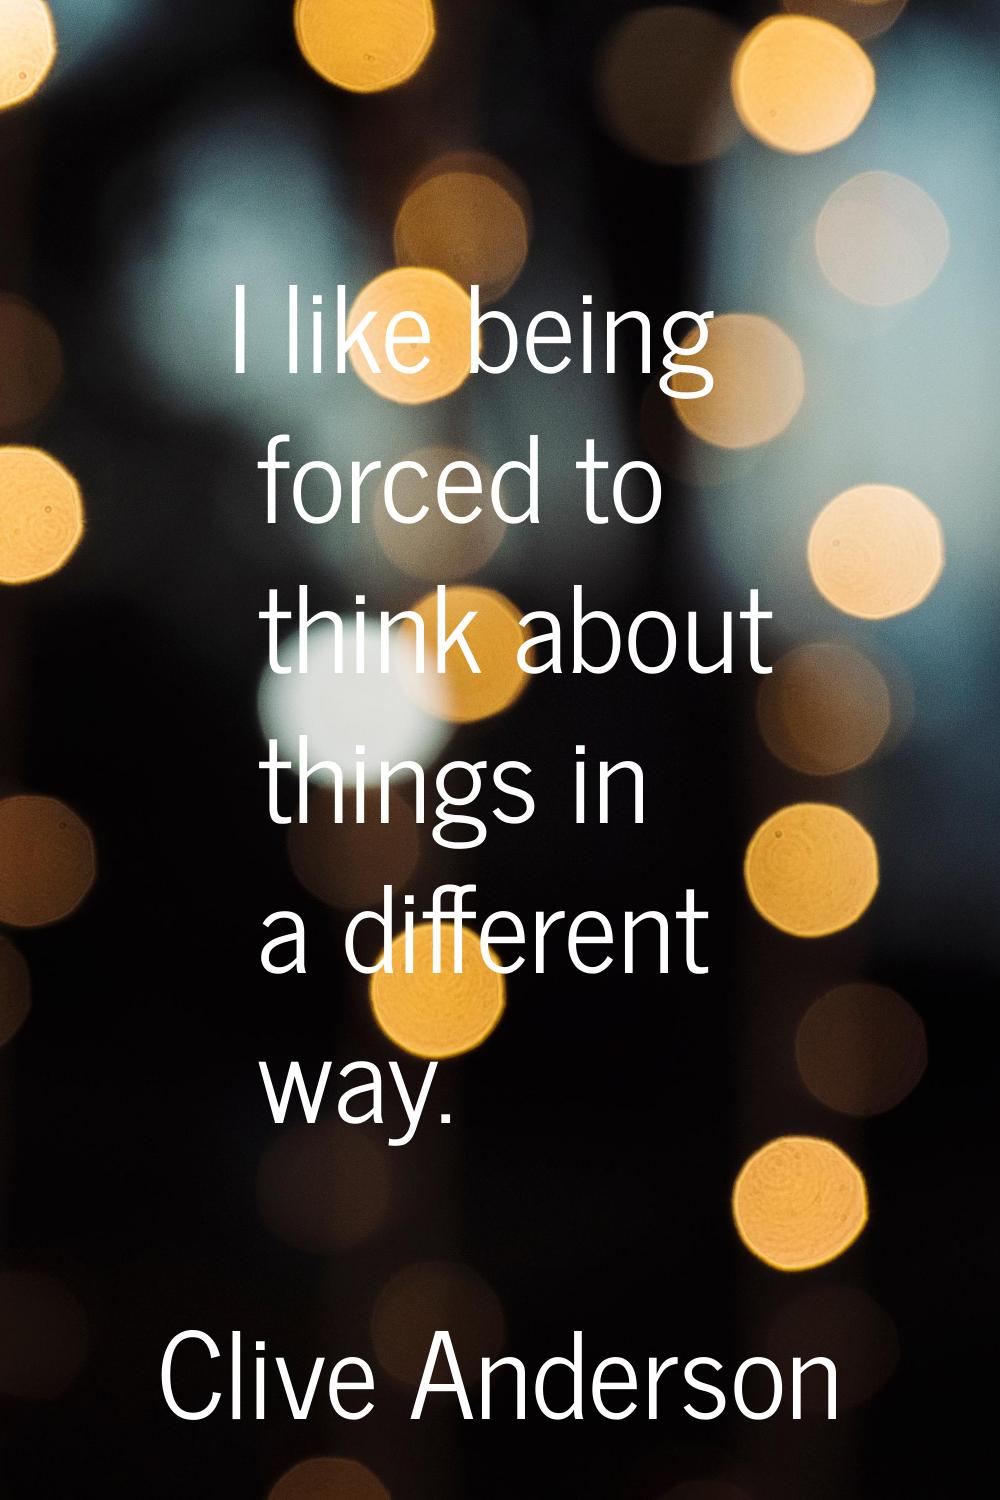 I like being forced to think about things in a different way.